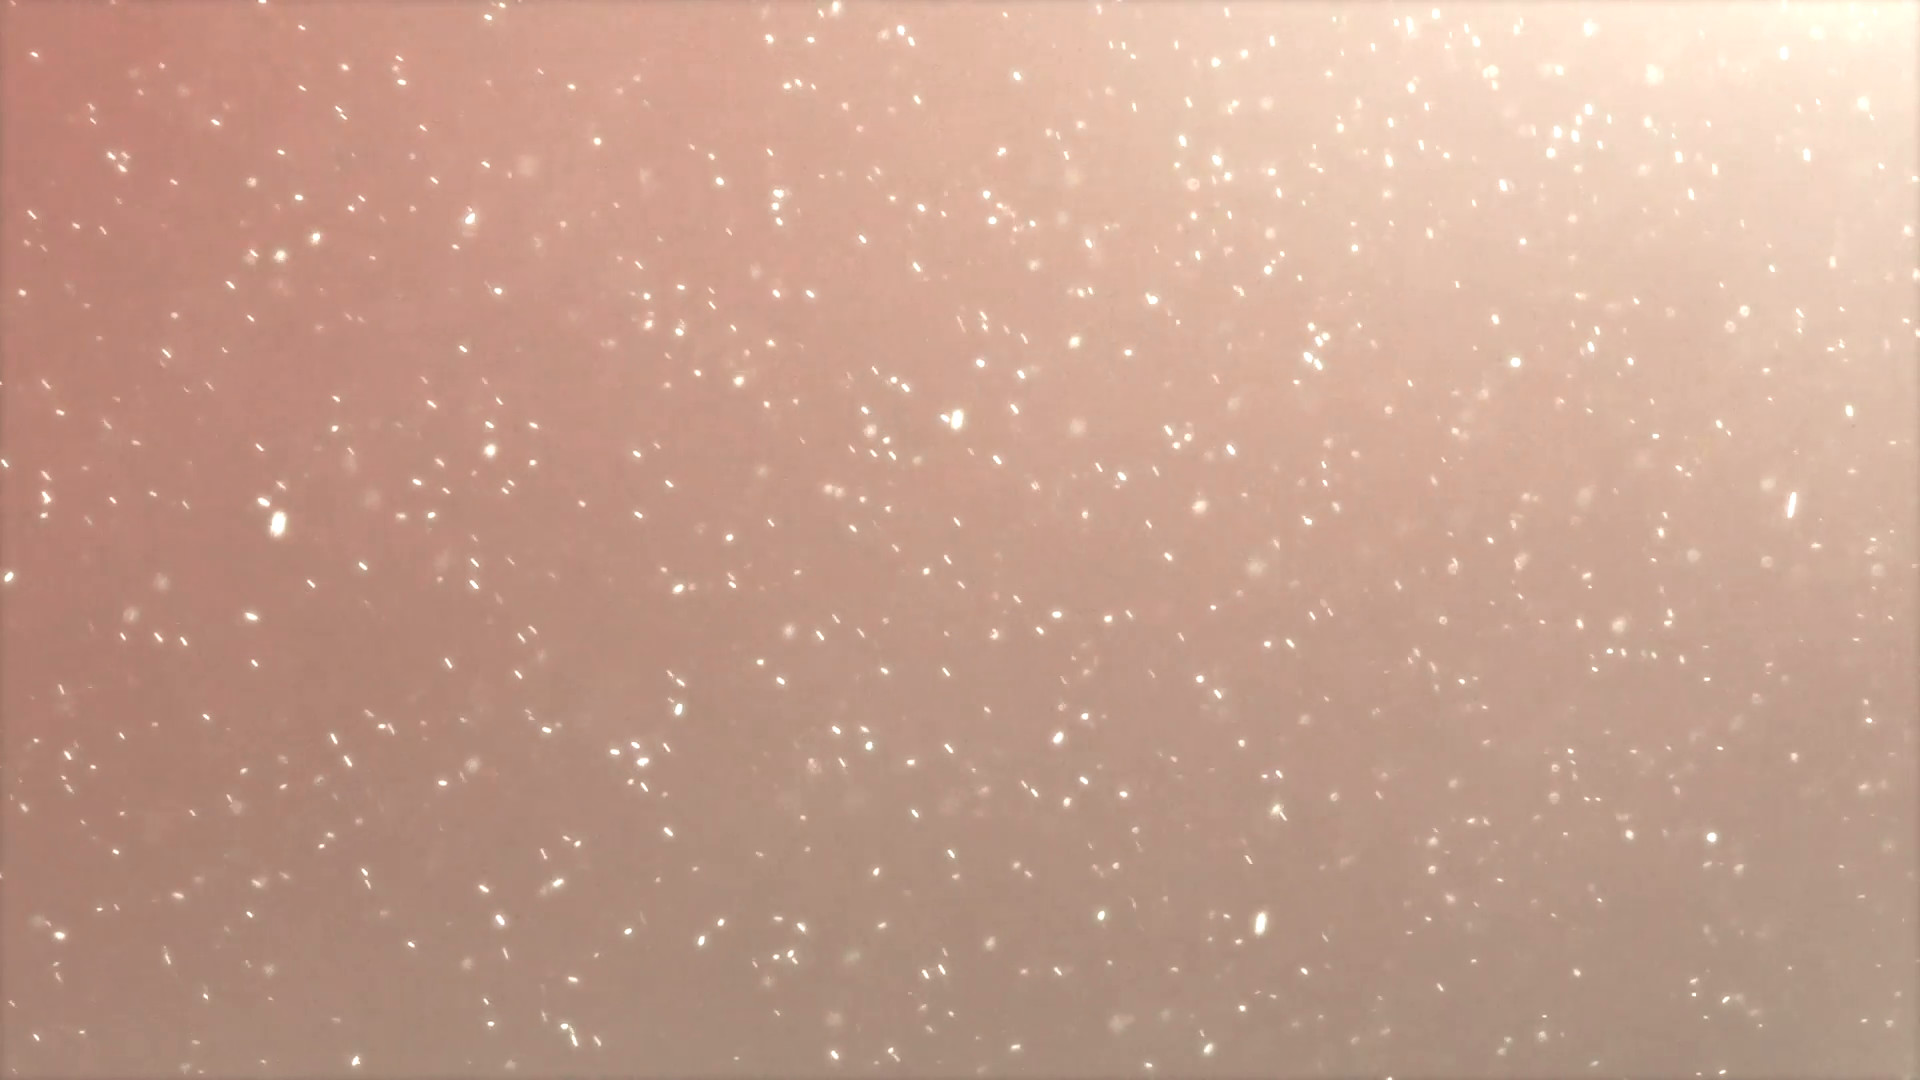 1920x1080 Flying particles 8 - magic snow, dust - Fairytale snowflake - Background  Motion Background - VideoBlocks